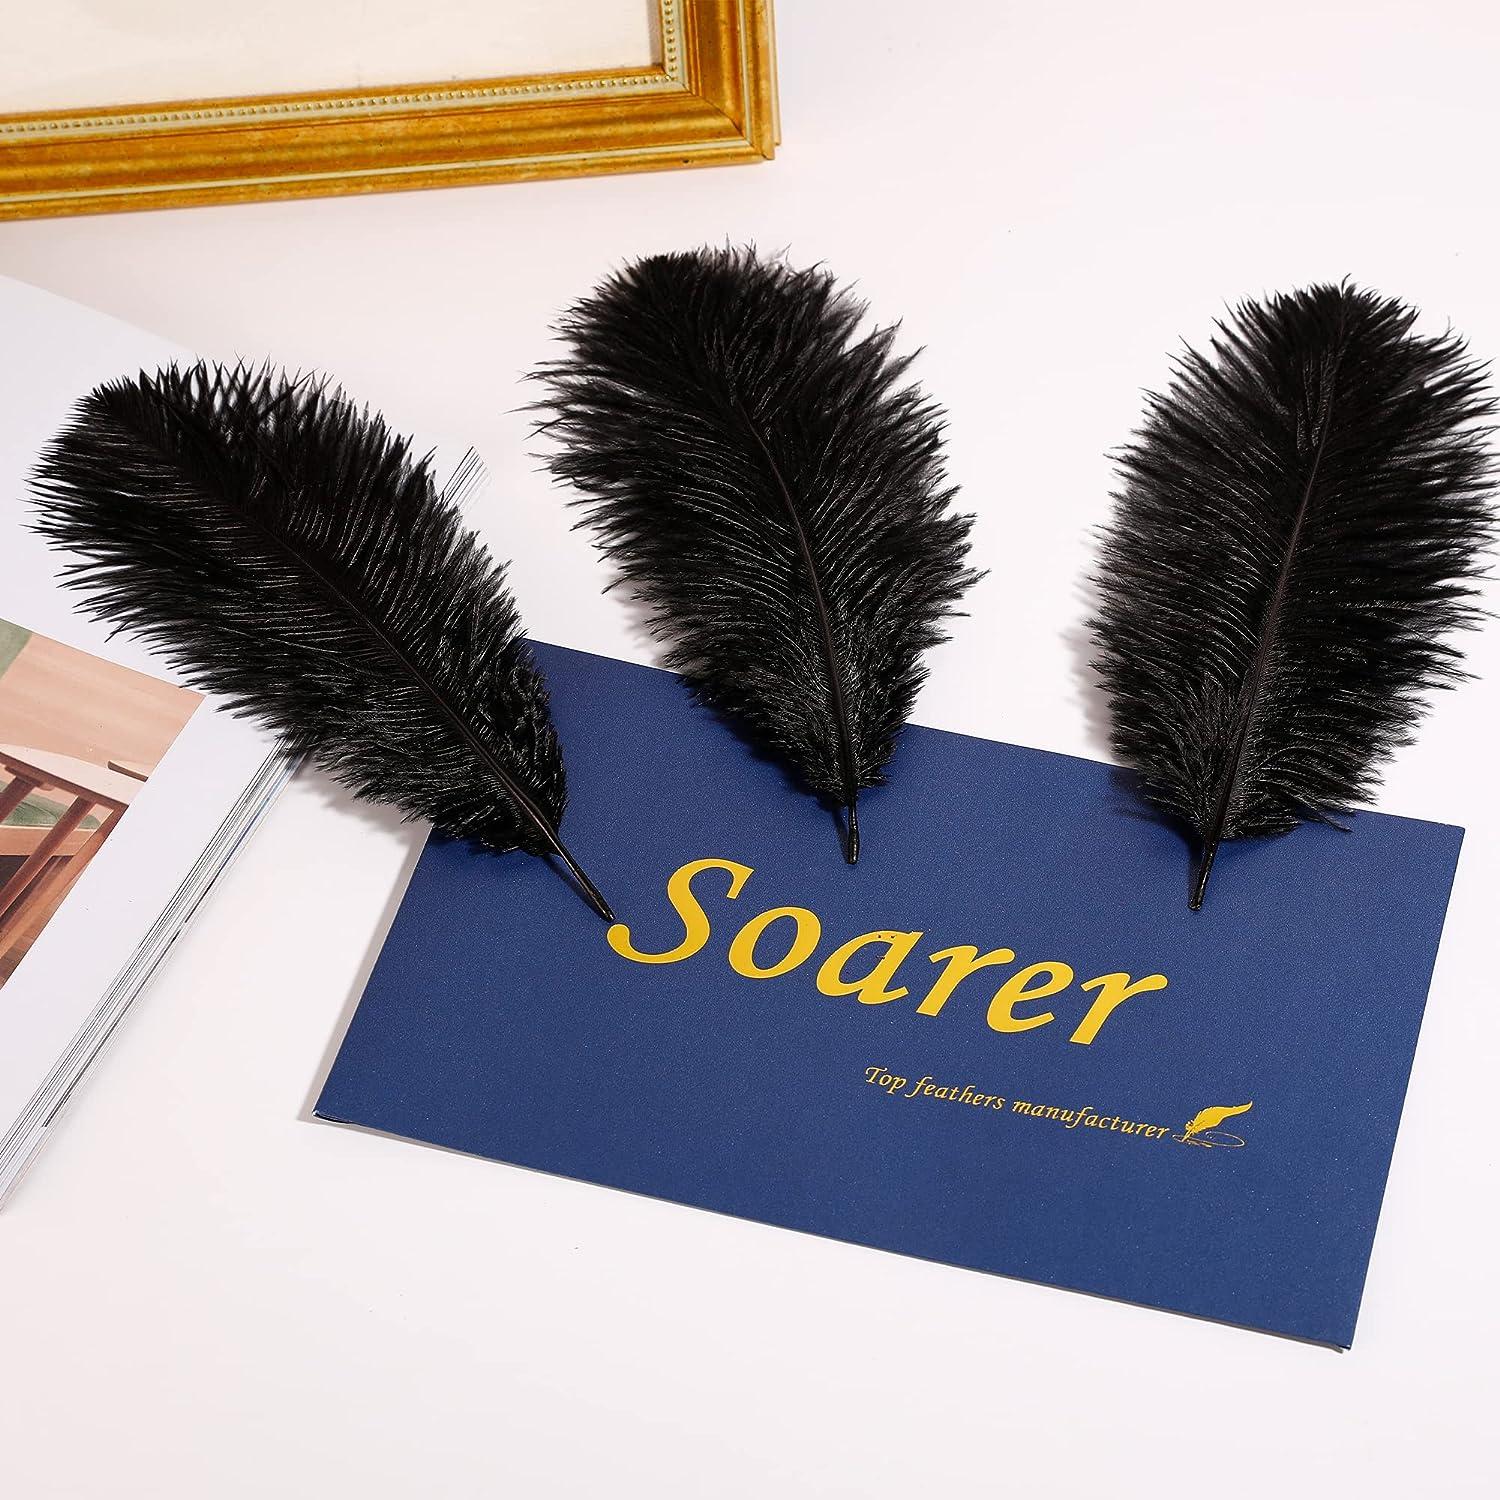 Wholesale Feathers for Centerpieces & Crafts: Lowest Prices Guaranteed